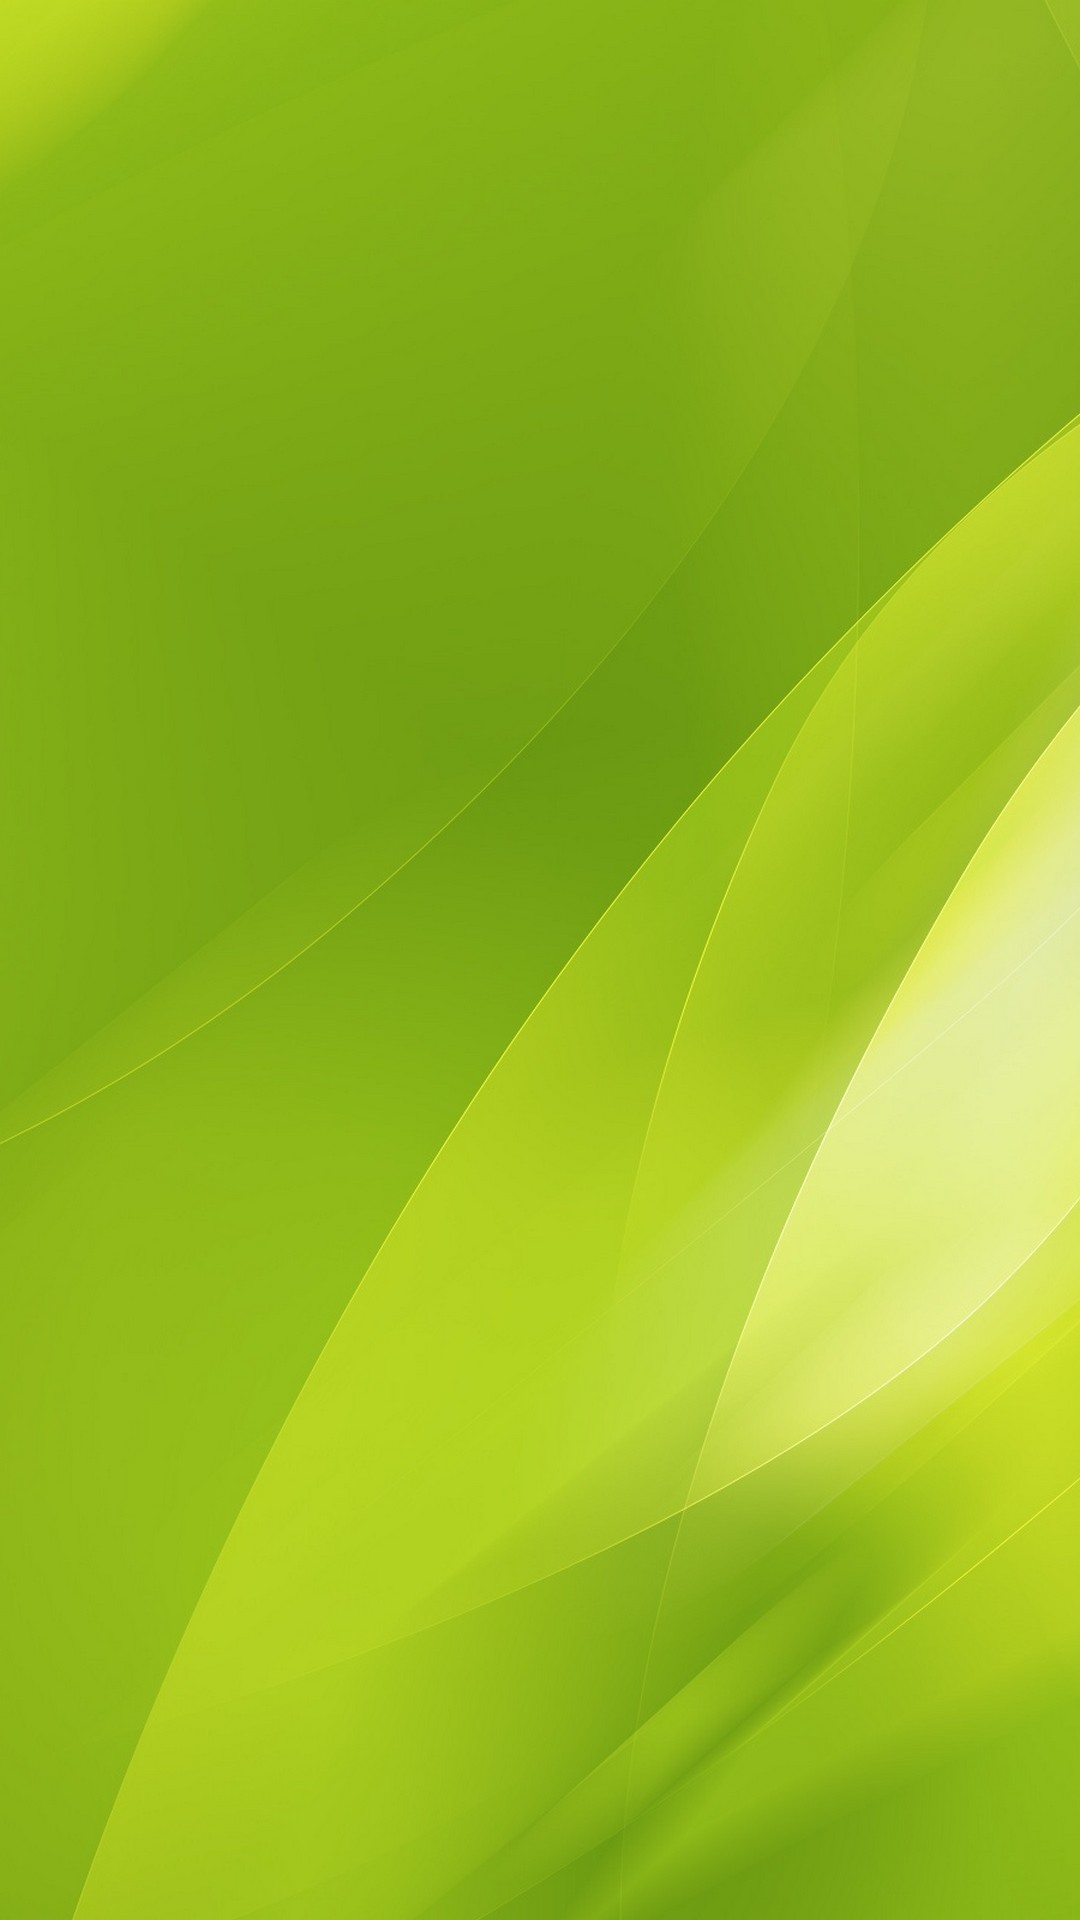 Lime Green Android Wallpaper with image resolution 1080x1920 pixel. You can make this wallpaper for your Android backgrounds, Tablet, Smartphones Screensavers and Mobile Phone Lock Screen